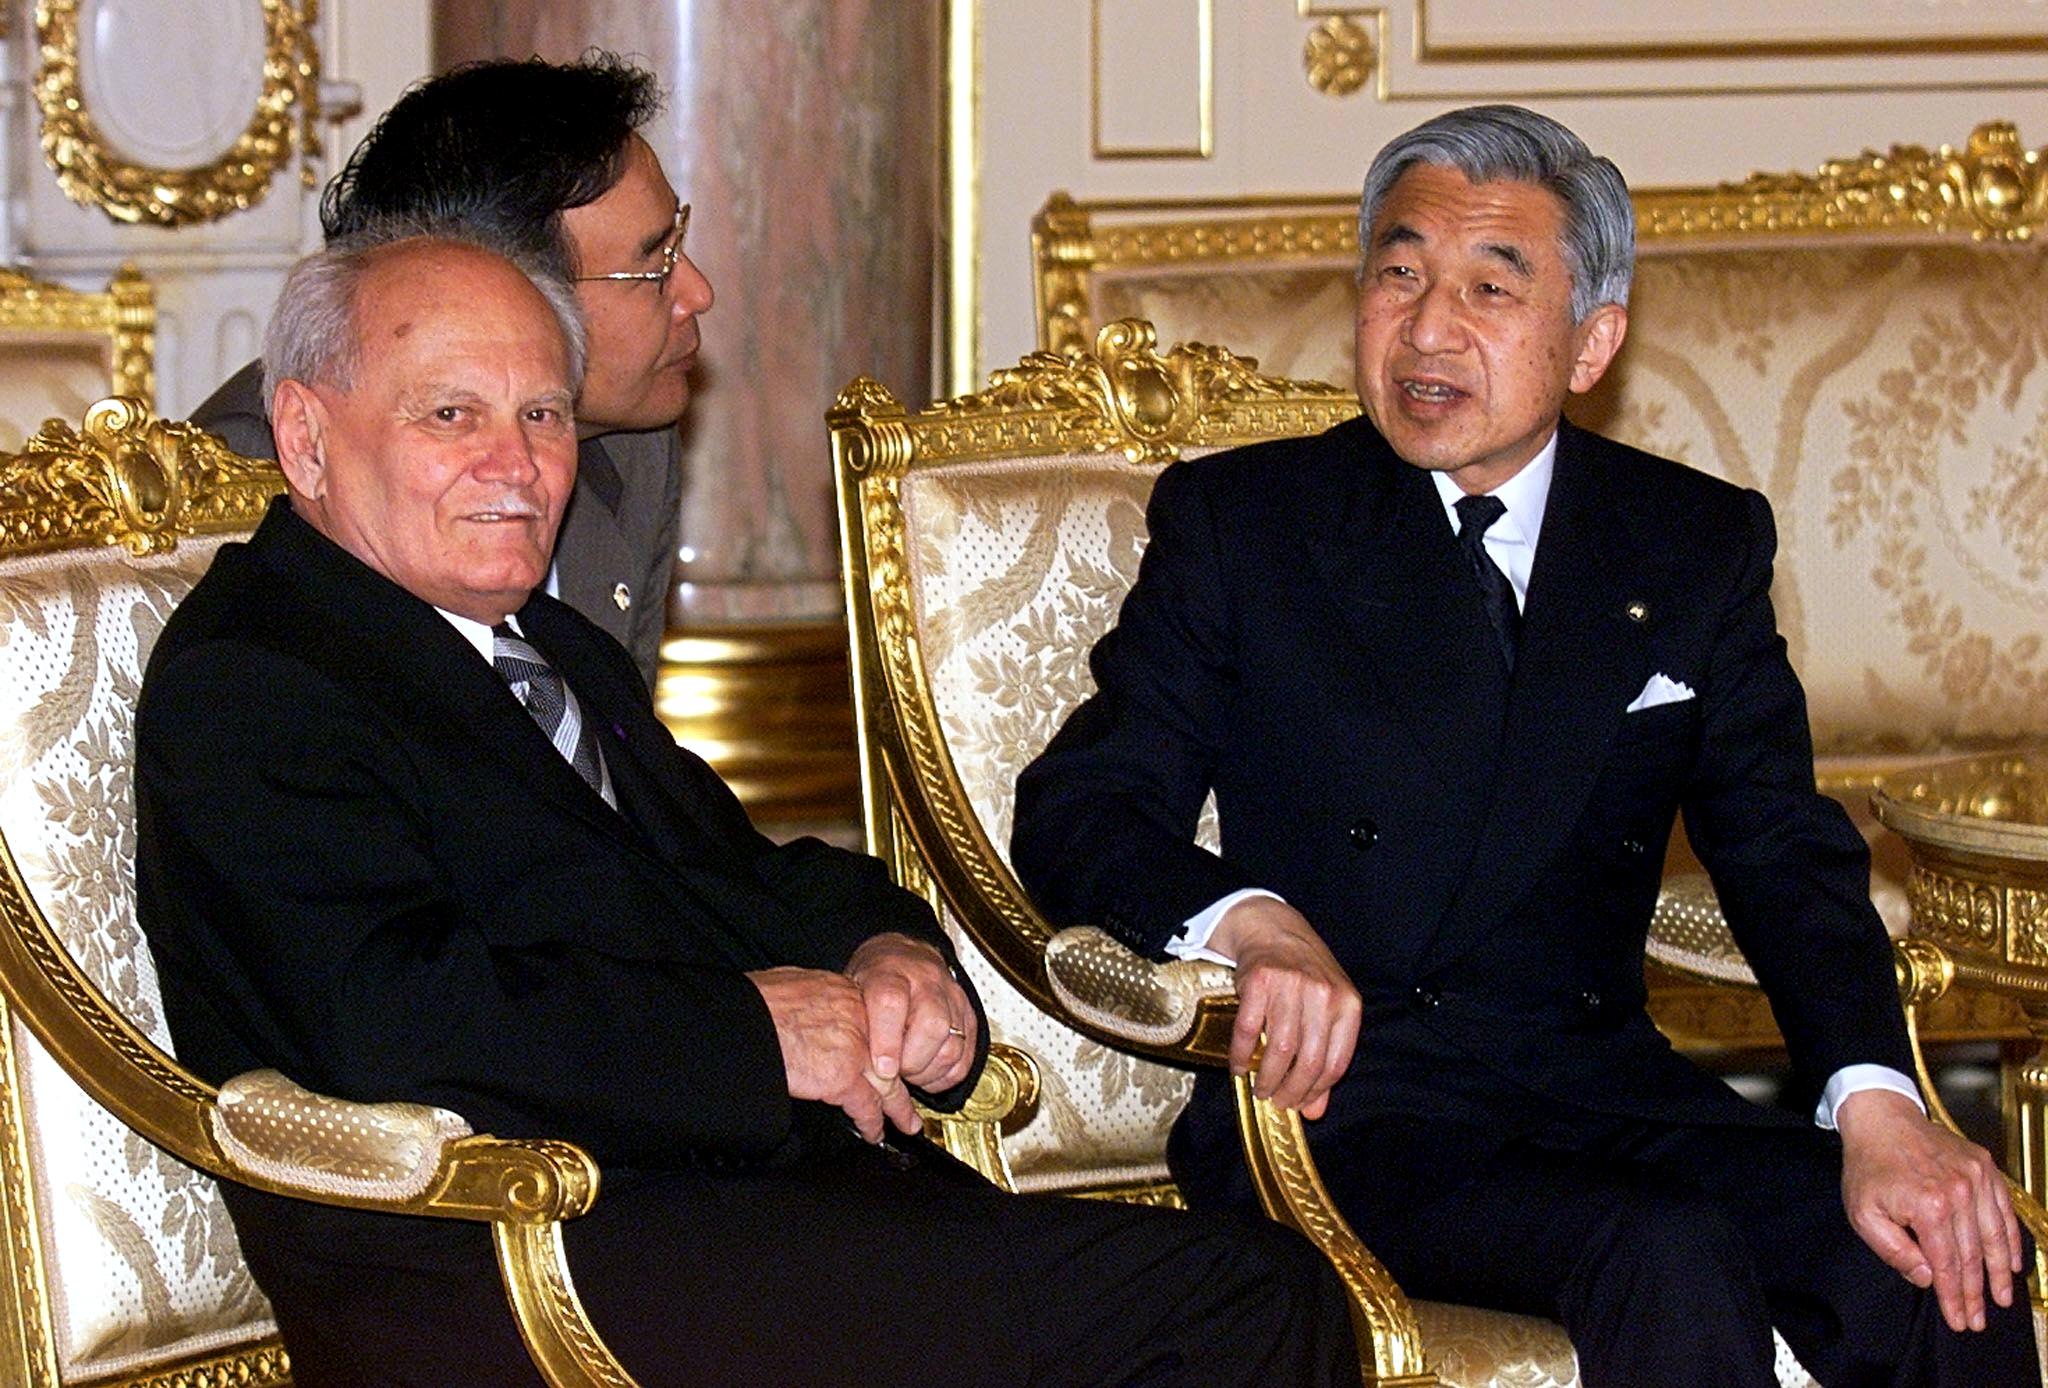 Visiting Hungarian President Arpad Goncz (L) chats with Japanese Emperor Akihito (R) during a meeting at the Akasaka state guesthouse in Tokyo 12 April 2000. Goncz is to end his three-day state visit in Tokyo to visit Osaka and Kyoto until 14 April. (ELECTRONIC IMAGE) AFP PHOTO POOL-Toshifumi KITAMURA